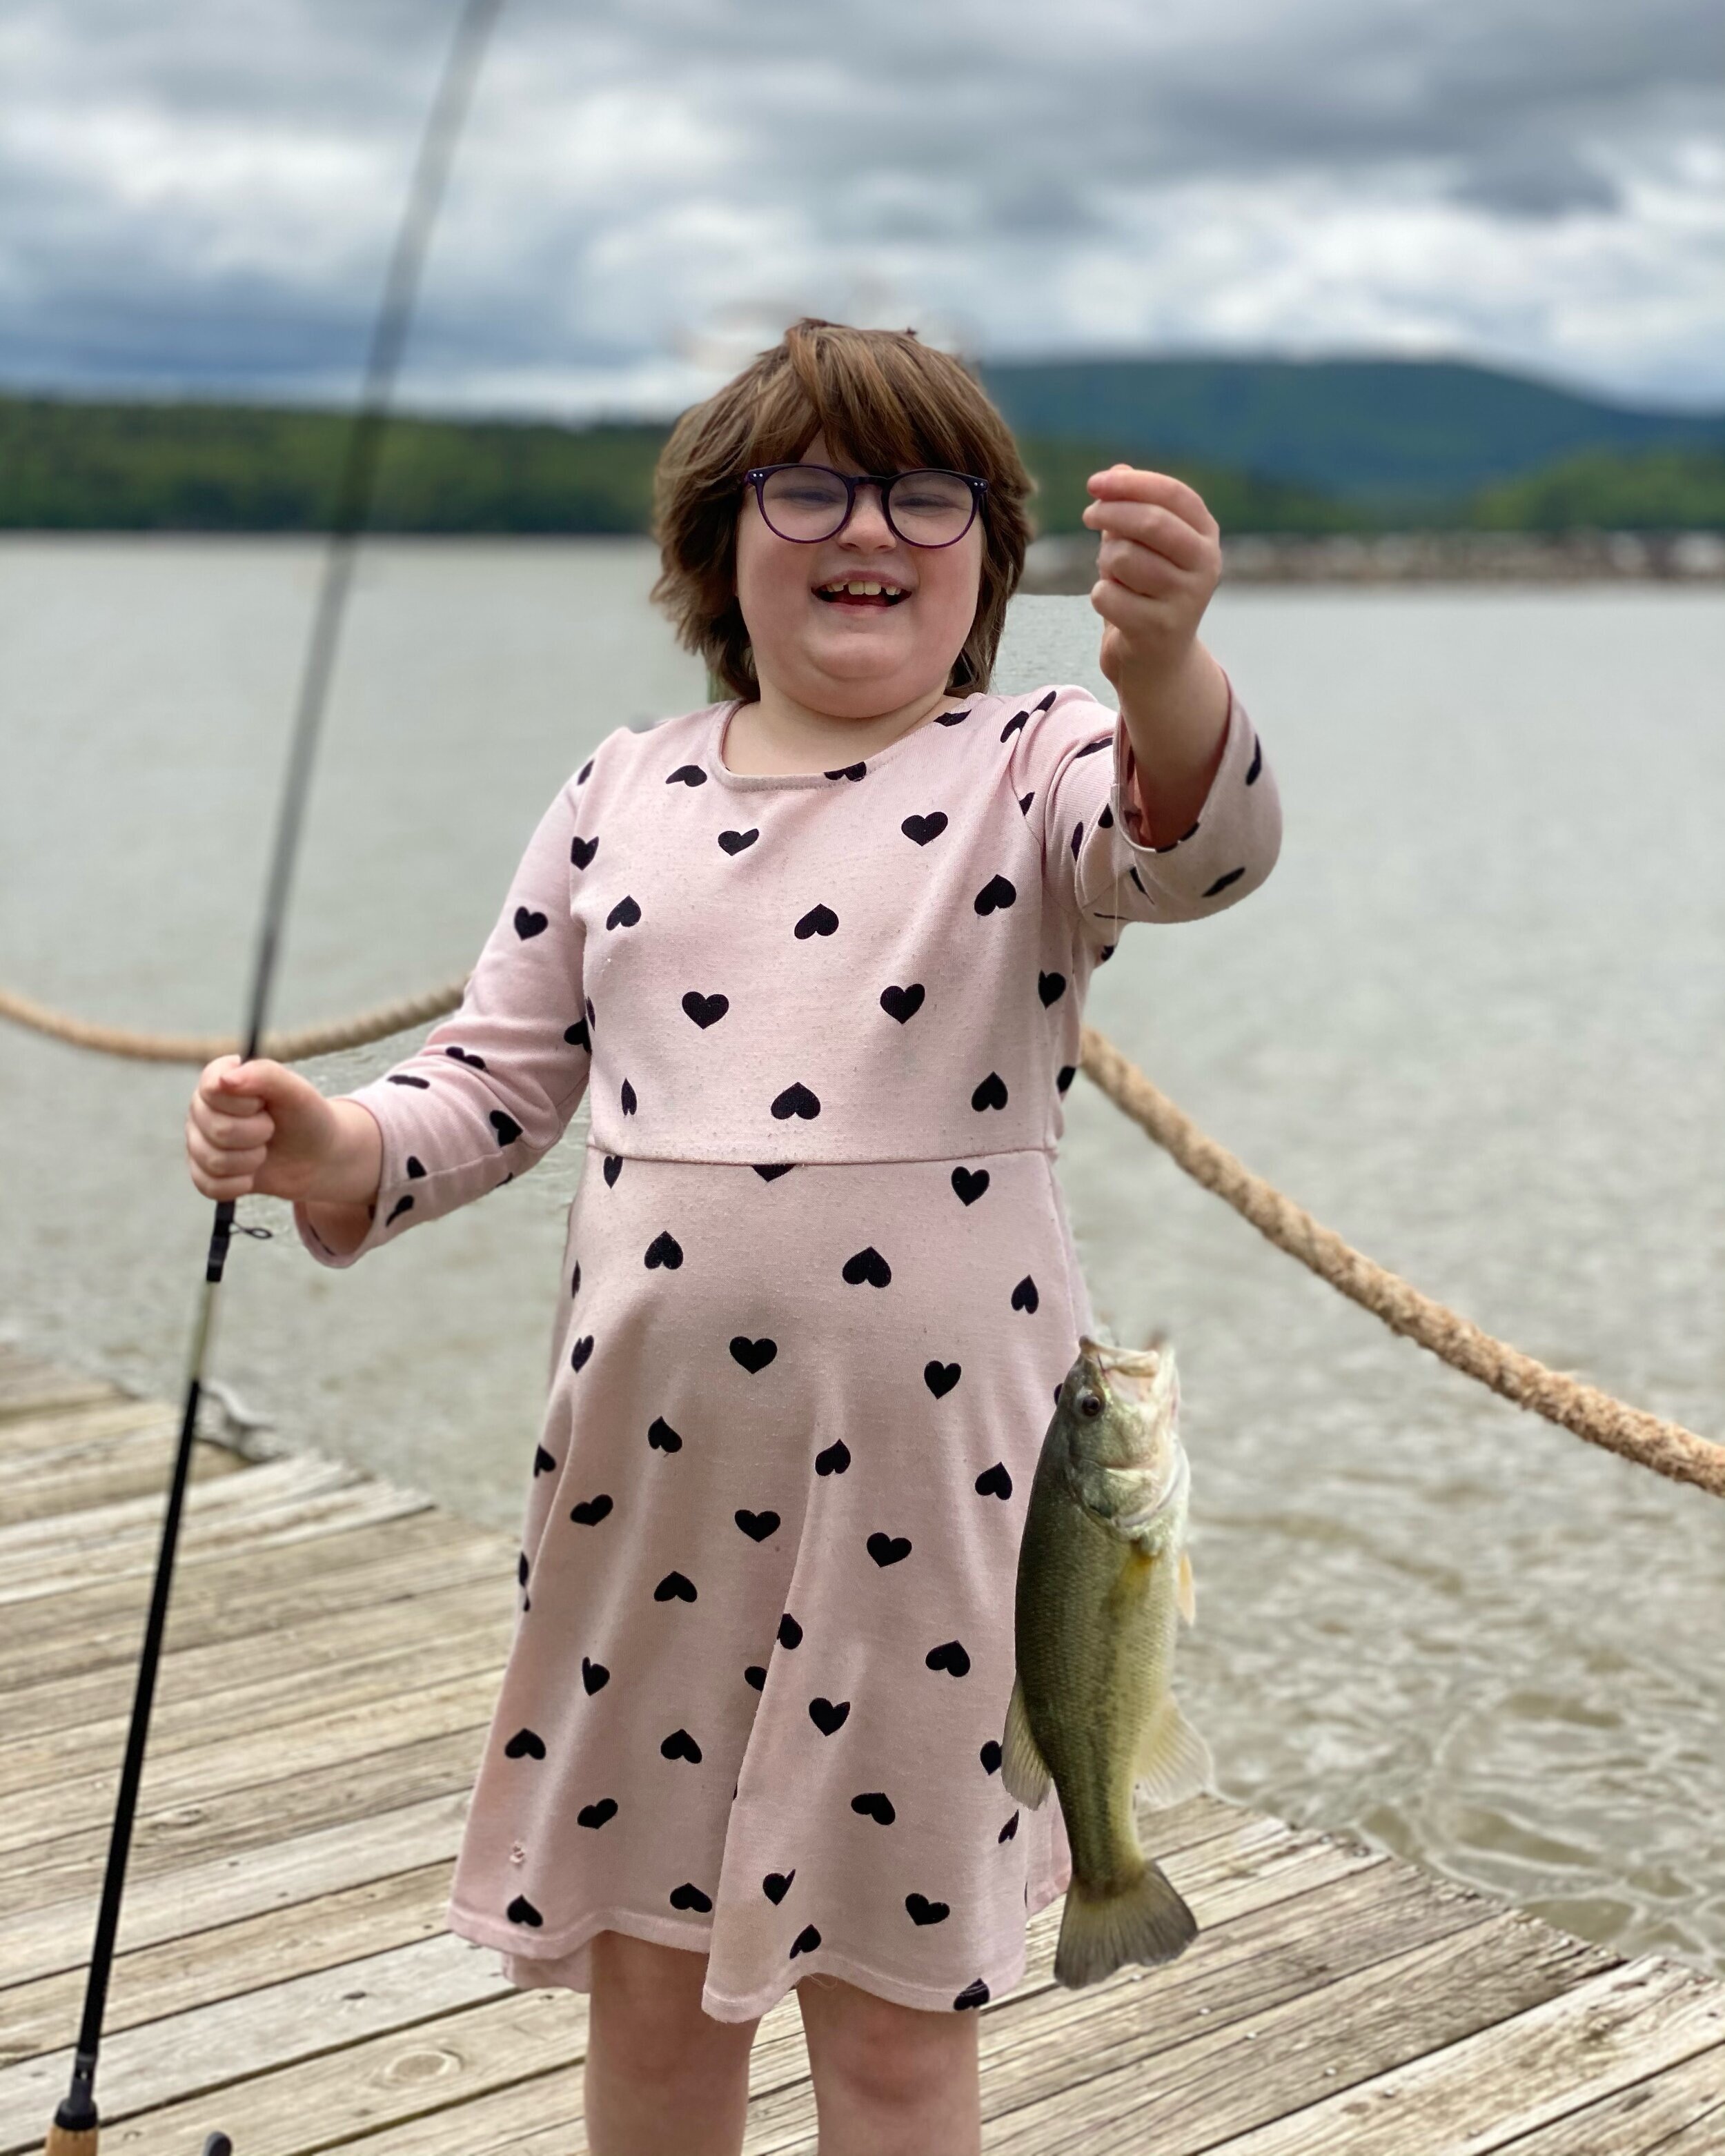 Fishing — Community Connections